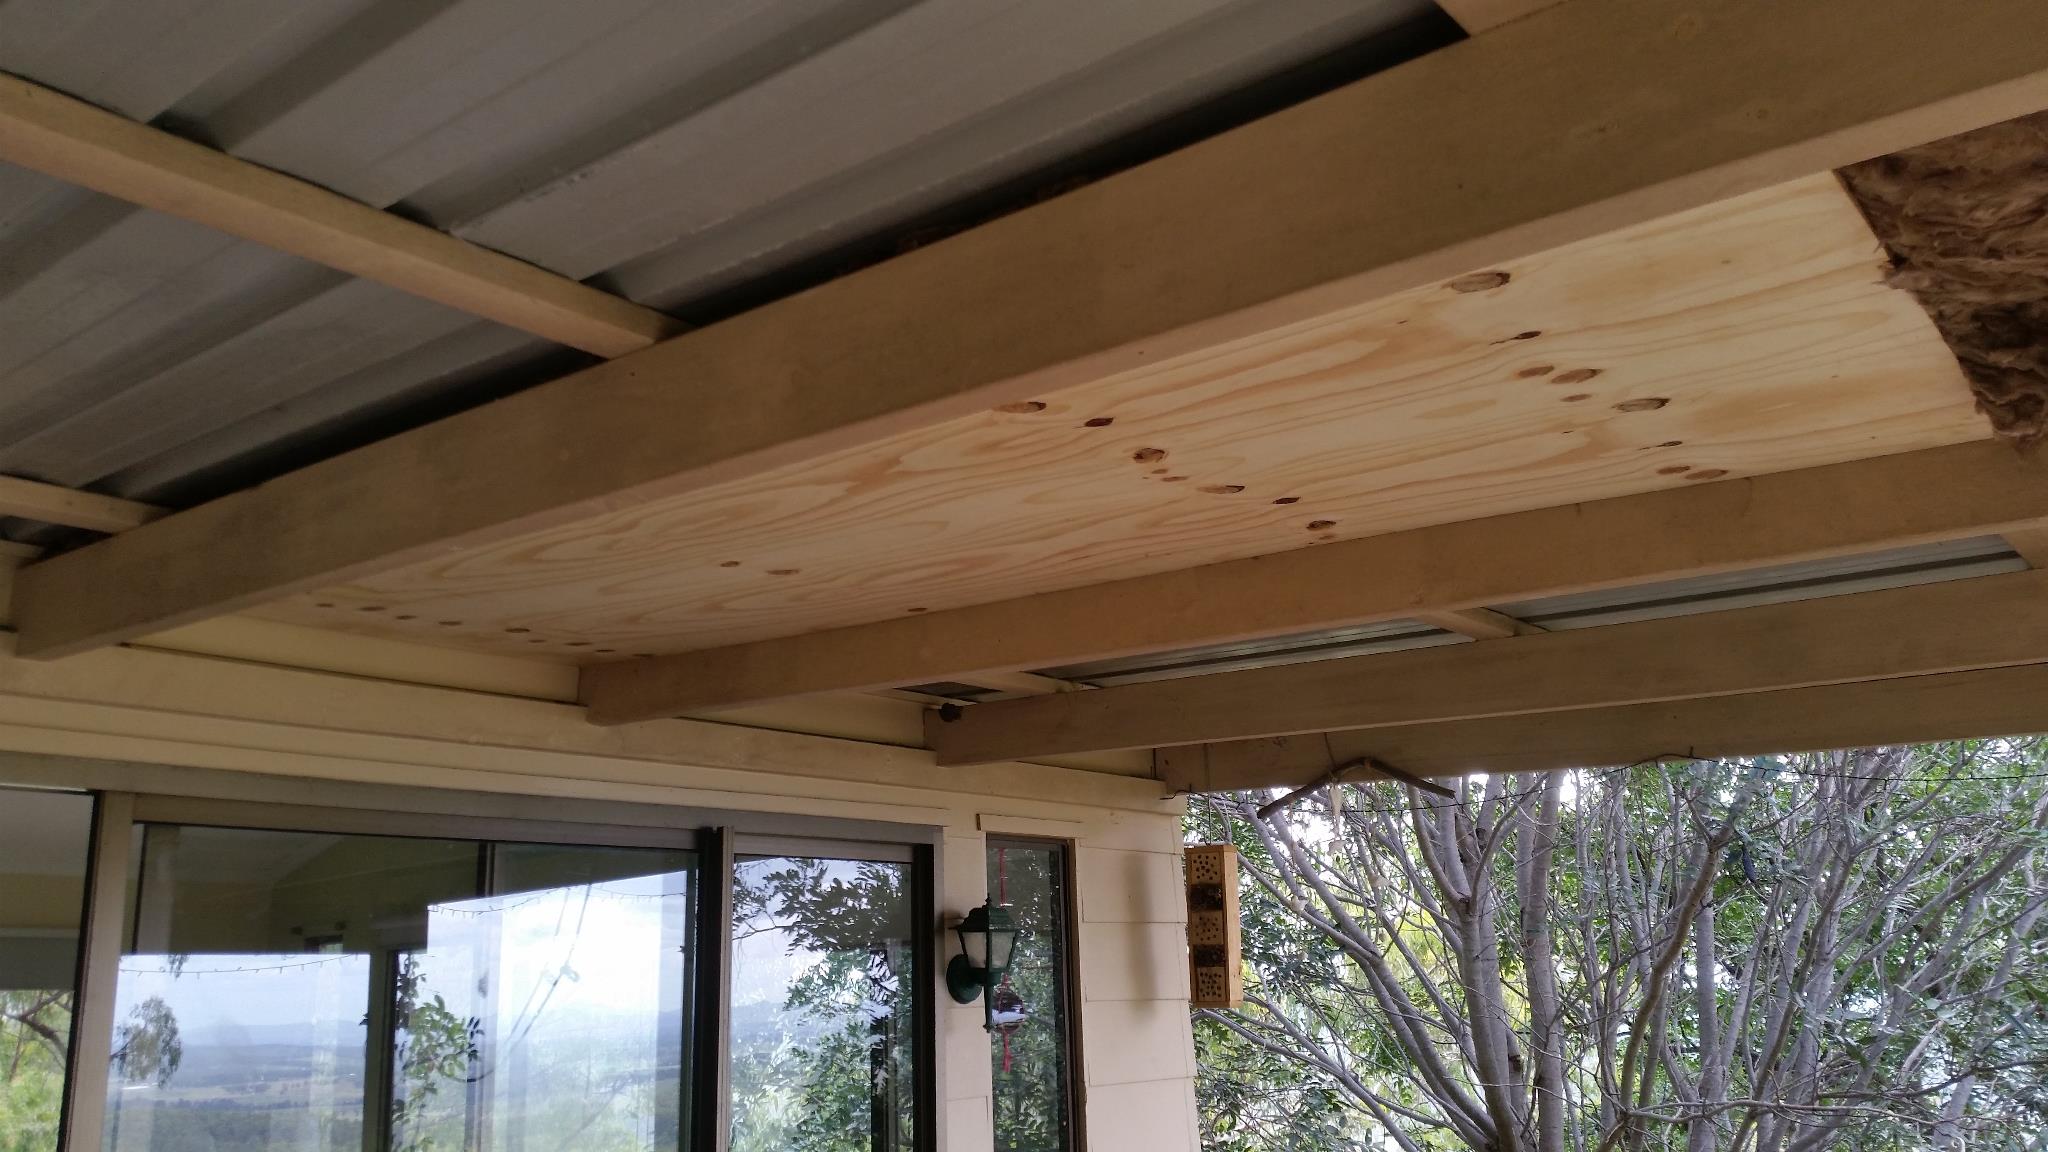 Insulating the deck roof